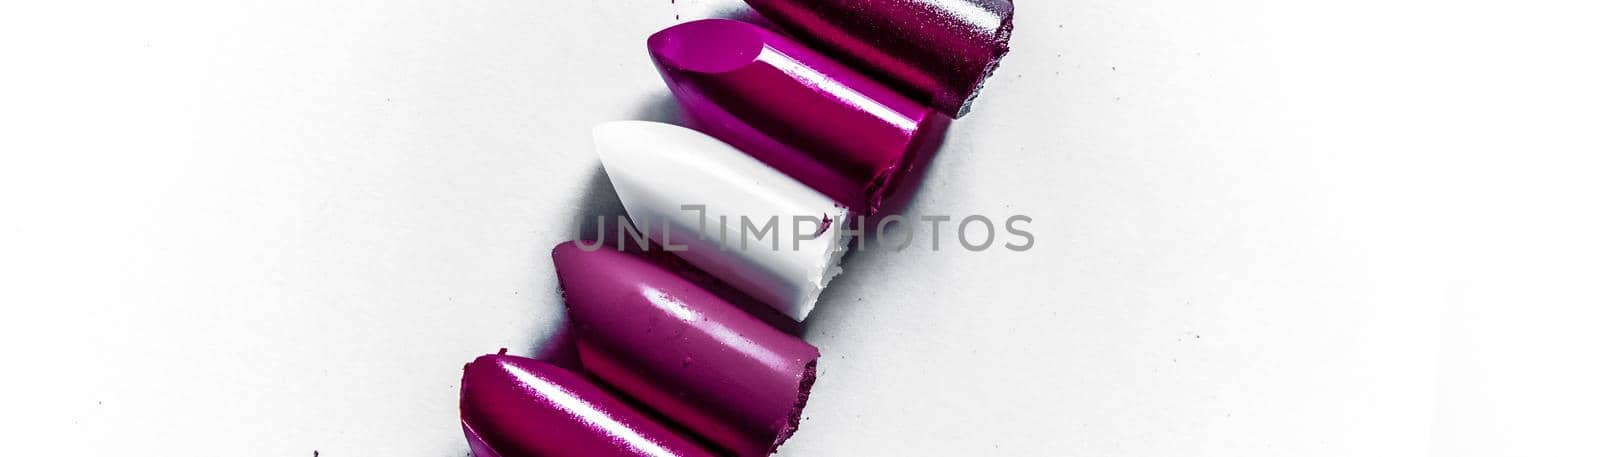 Beauty texture, cosmetic product and art of make-up concept - Cutted lipstick close-up isolated on white background